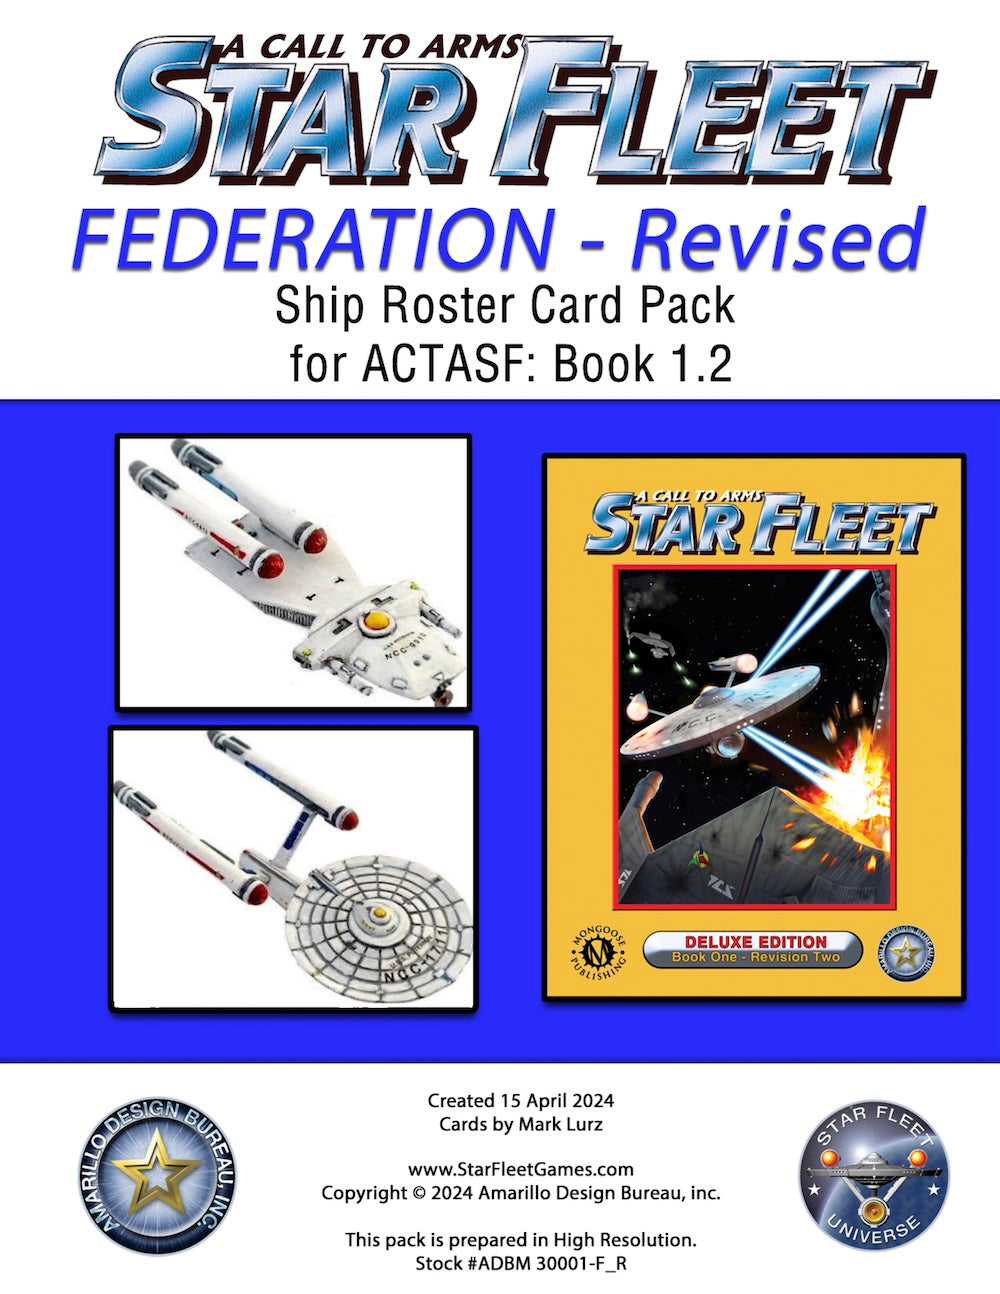 A Call to Arms: Star Fleet, Book 1.2: Federation Ship Roster Card Pack Revised